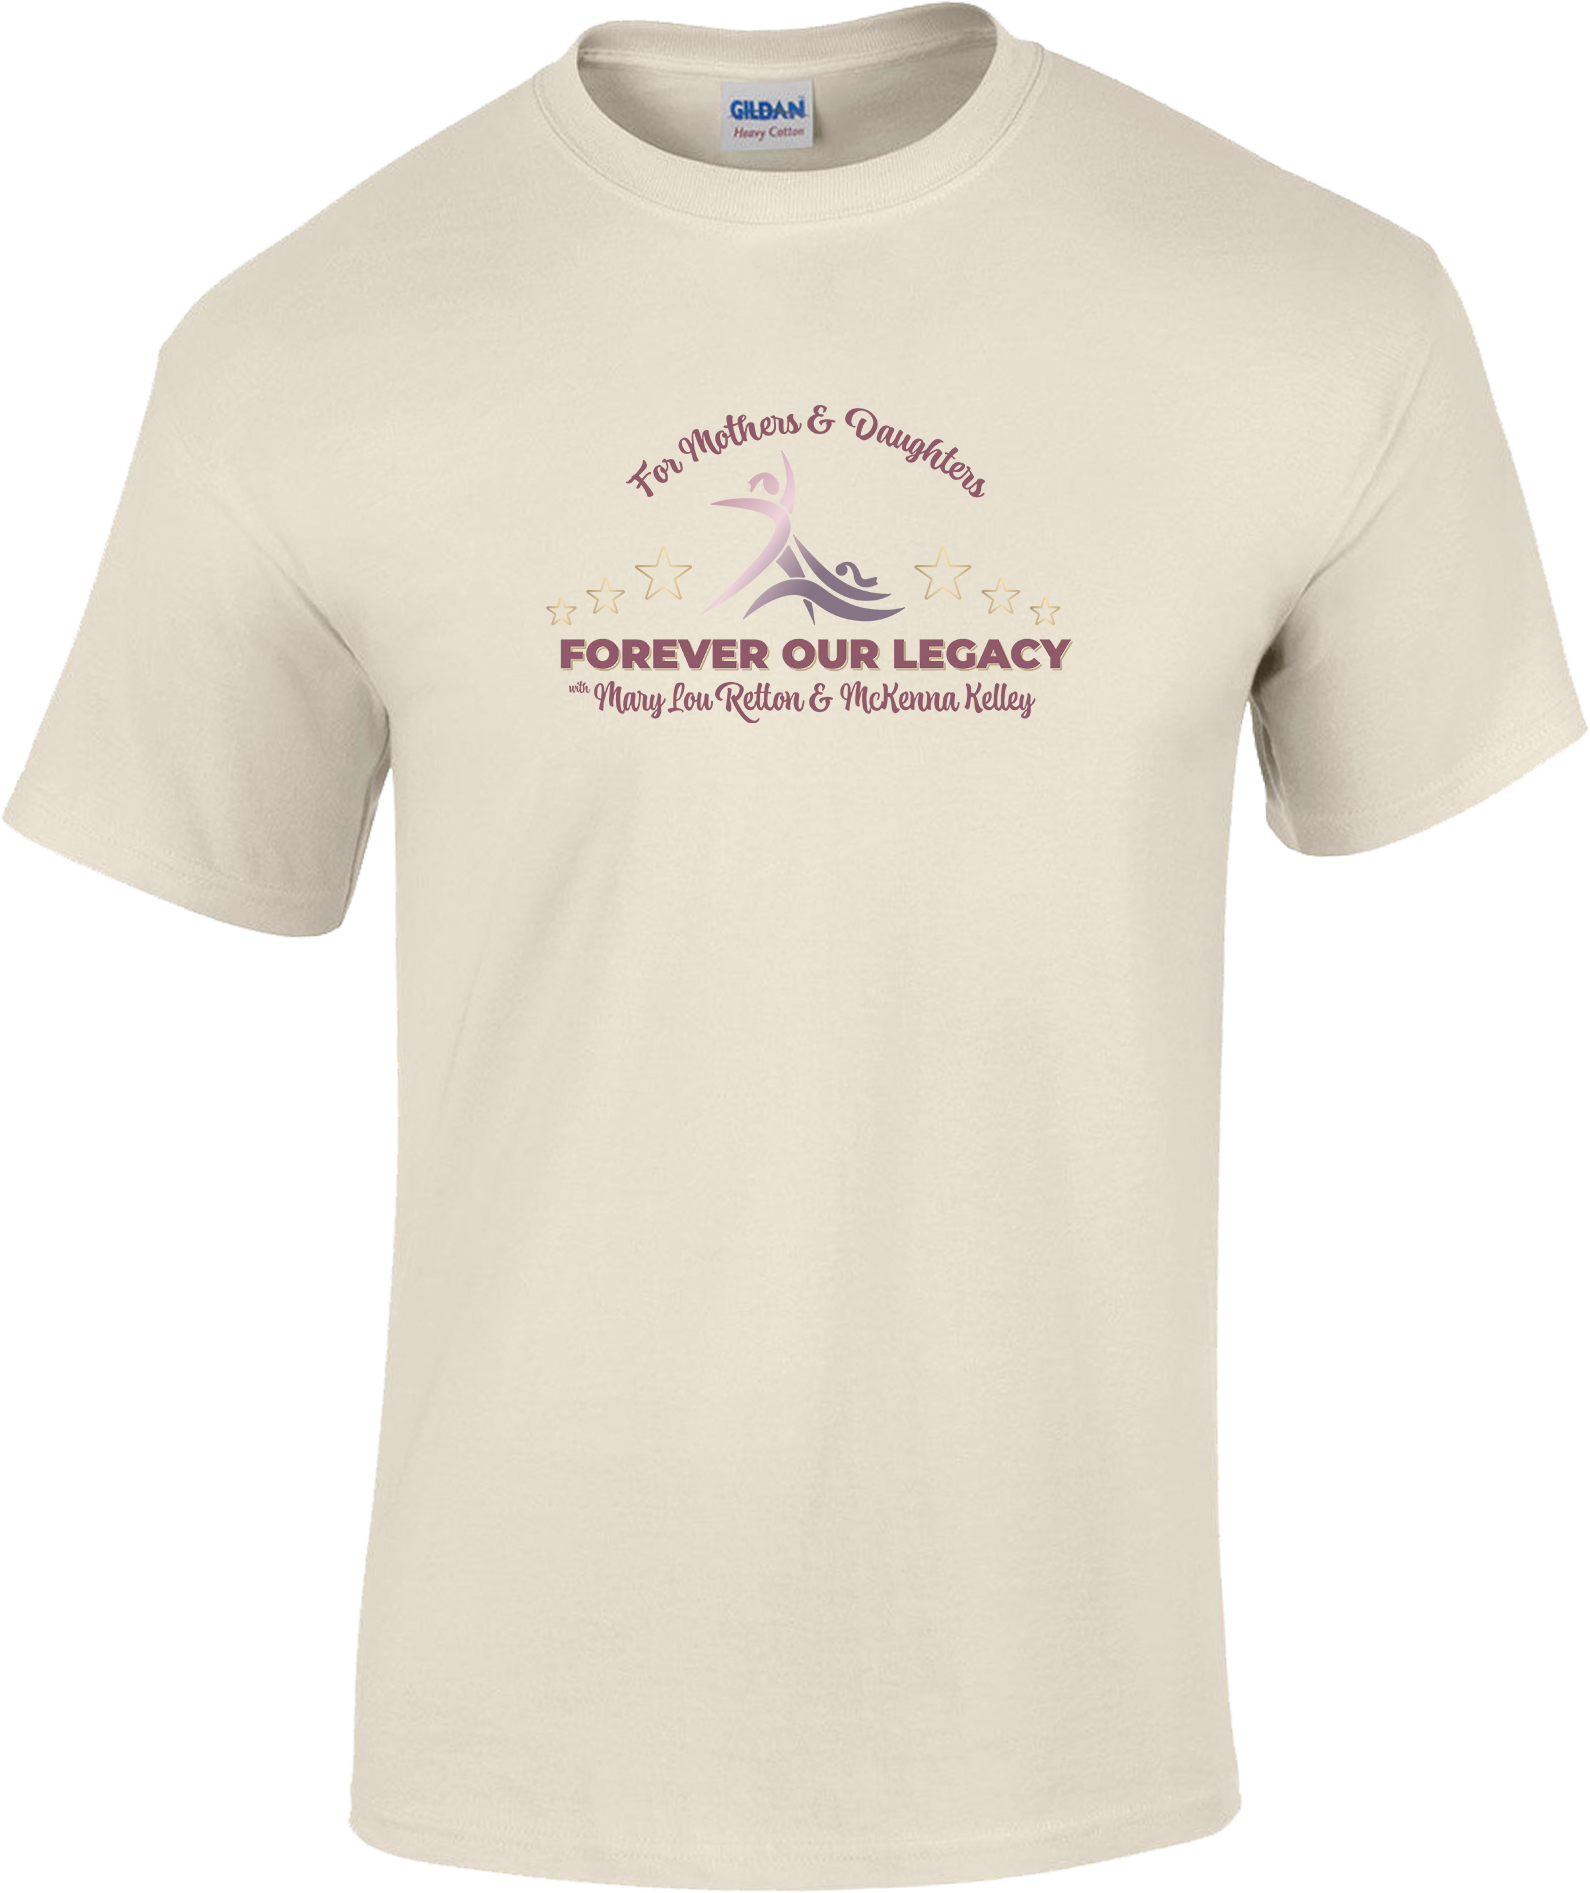 SHORT SLEEVES - 2023 For Mothers & Daughters Forever Our Legacy with Mary Lou Retton and Mckenna Kelley